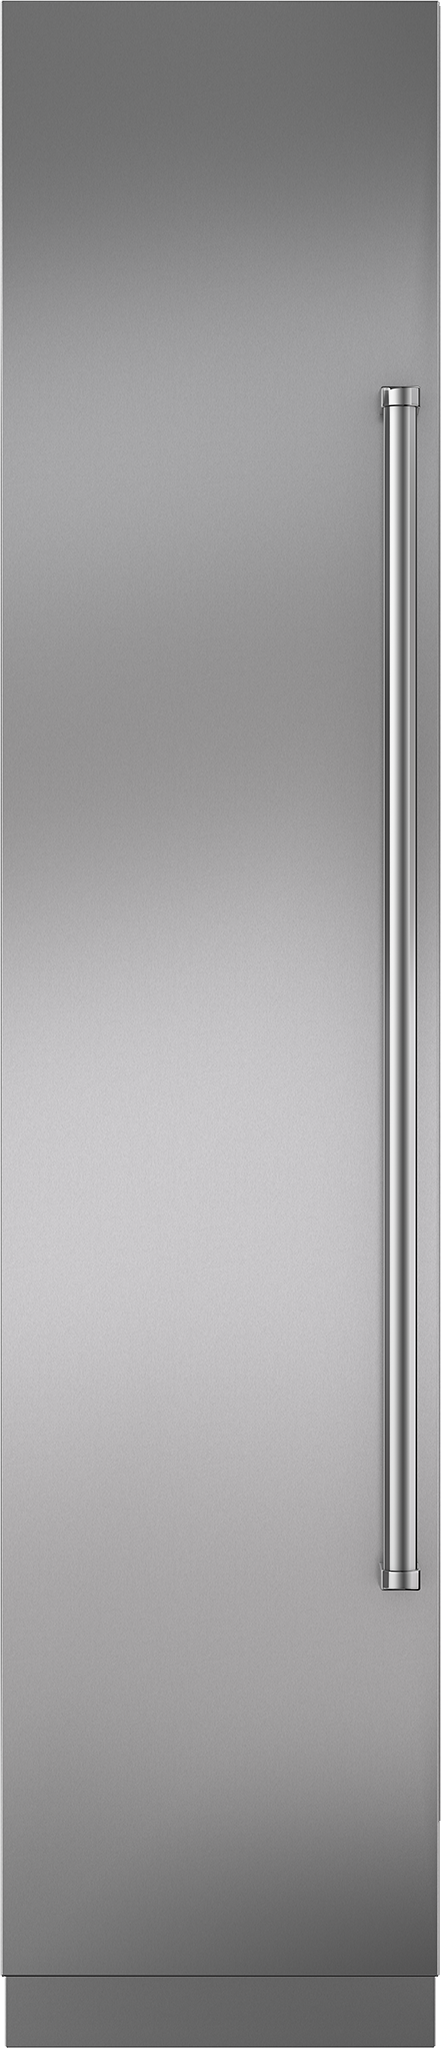 Stainless Steel Door Panel with Pro Handle and 4